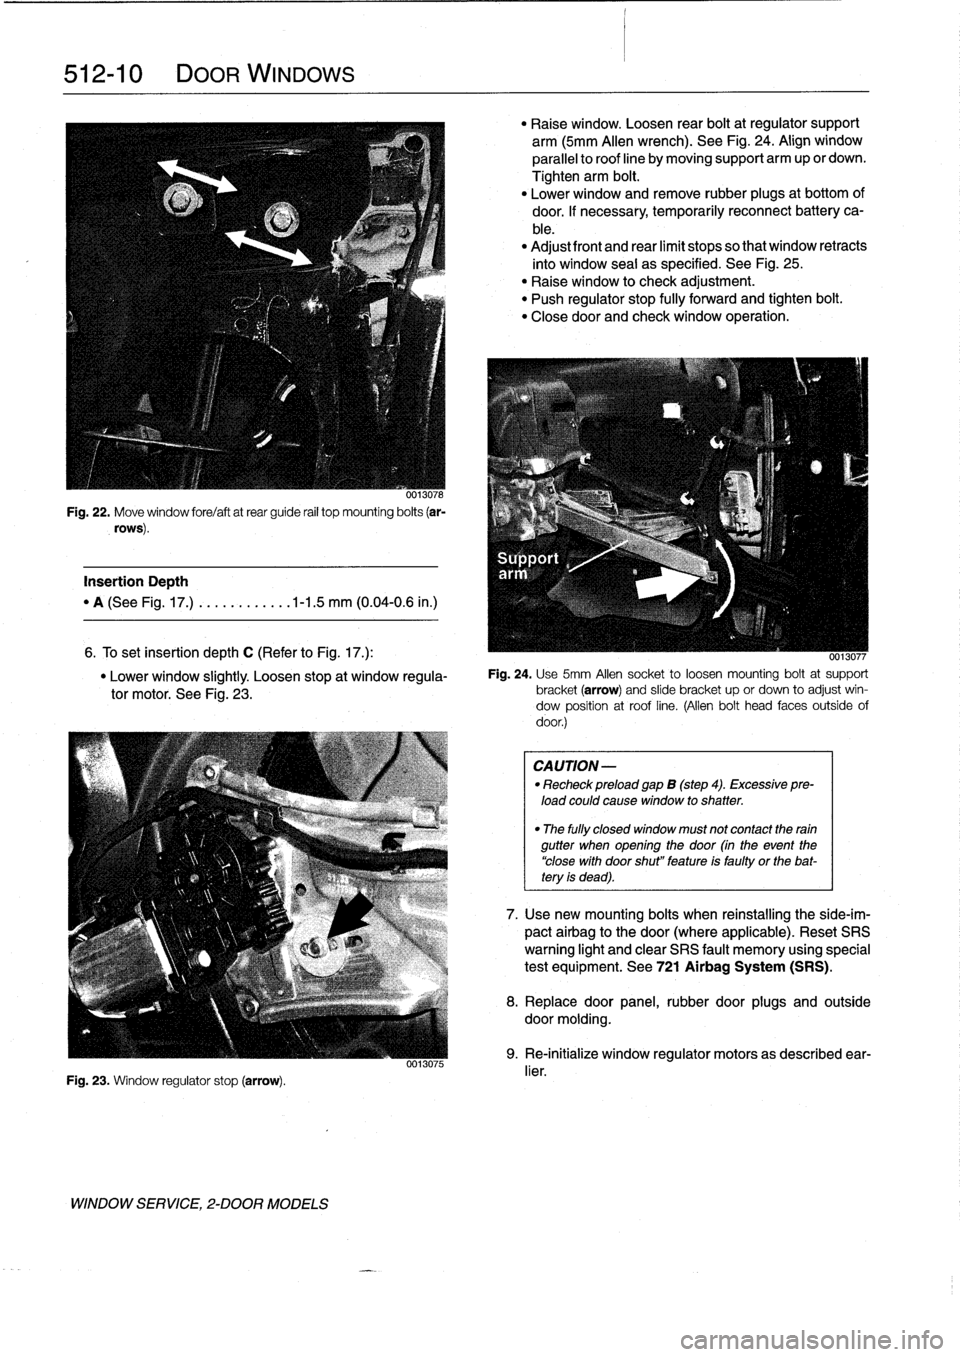 BMW M3 1993 E36 Workshop Manual 
512-
1
0

	

DOOR
WINDOWS

0013078

Fig
.
22
.
Move
window
fore/aftatrear
guide
rail
top
mounting
bolts
(ar-

rows)
.

Insertion
Depth

"
A
(See
Fig
.
17
.)
.
..........
.1-1
.5
mm
(0
.04-0
.6
in
.)
